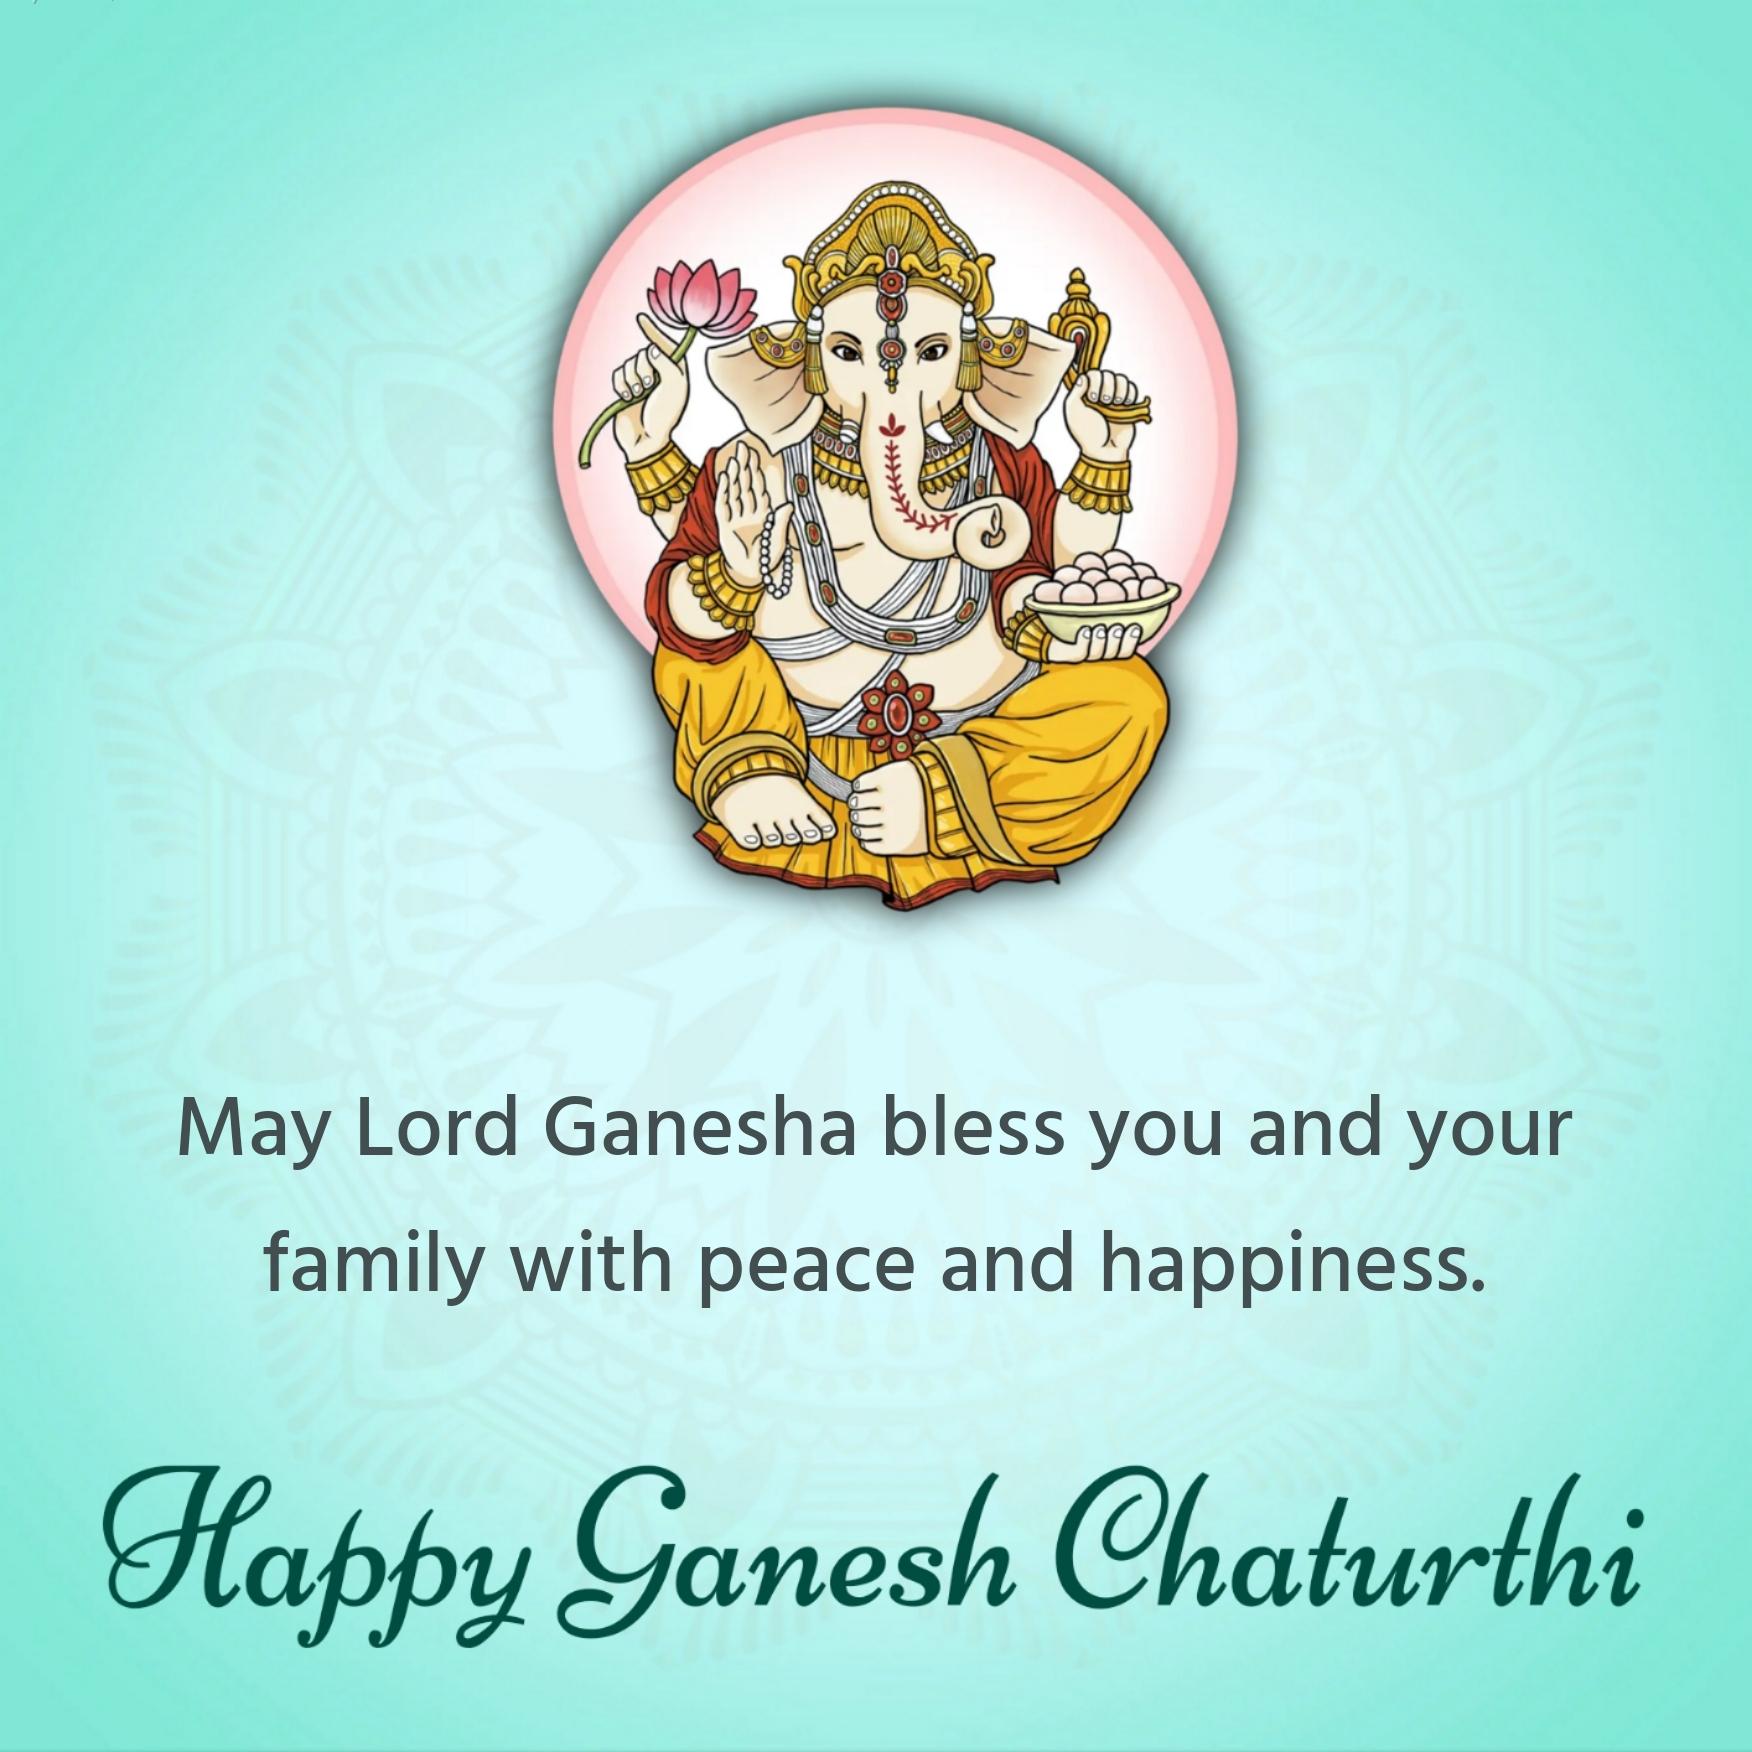 May Lord Ganesha bless you and your family